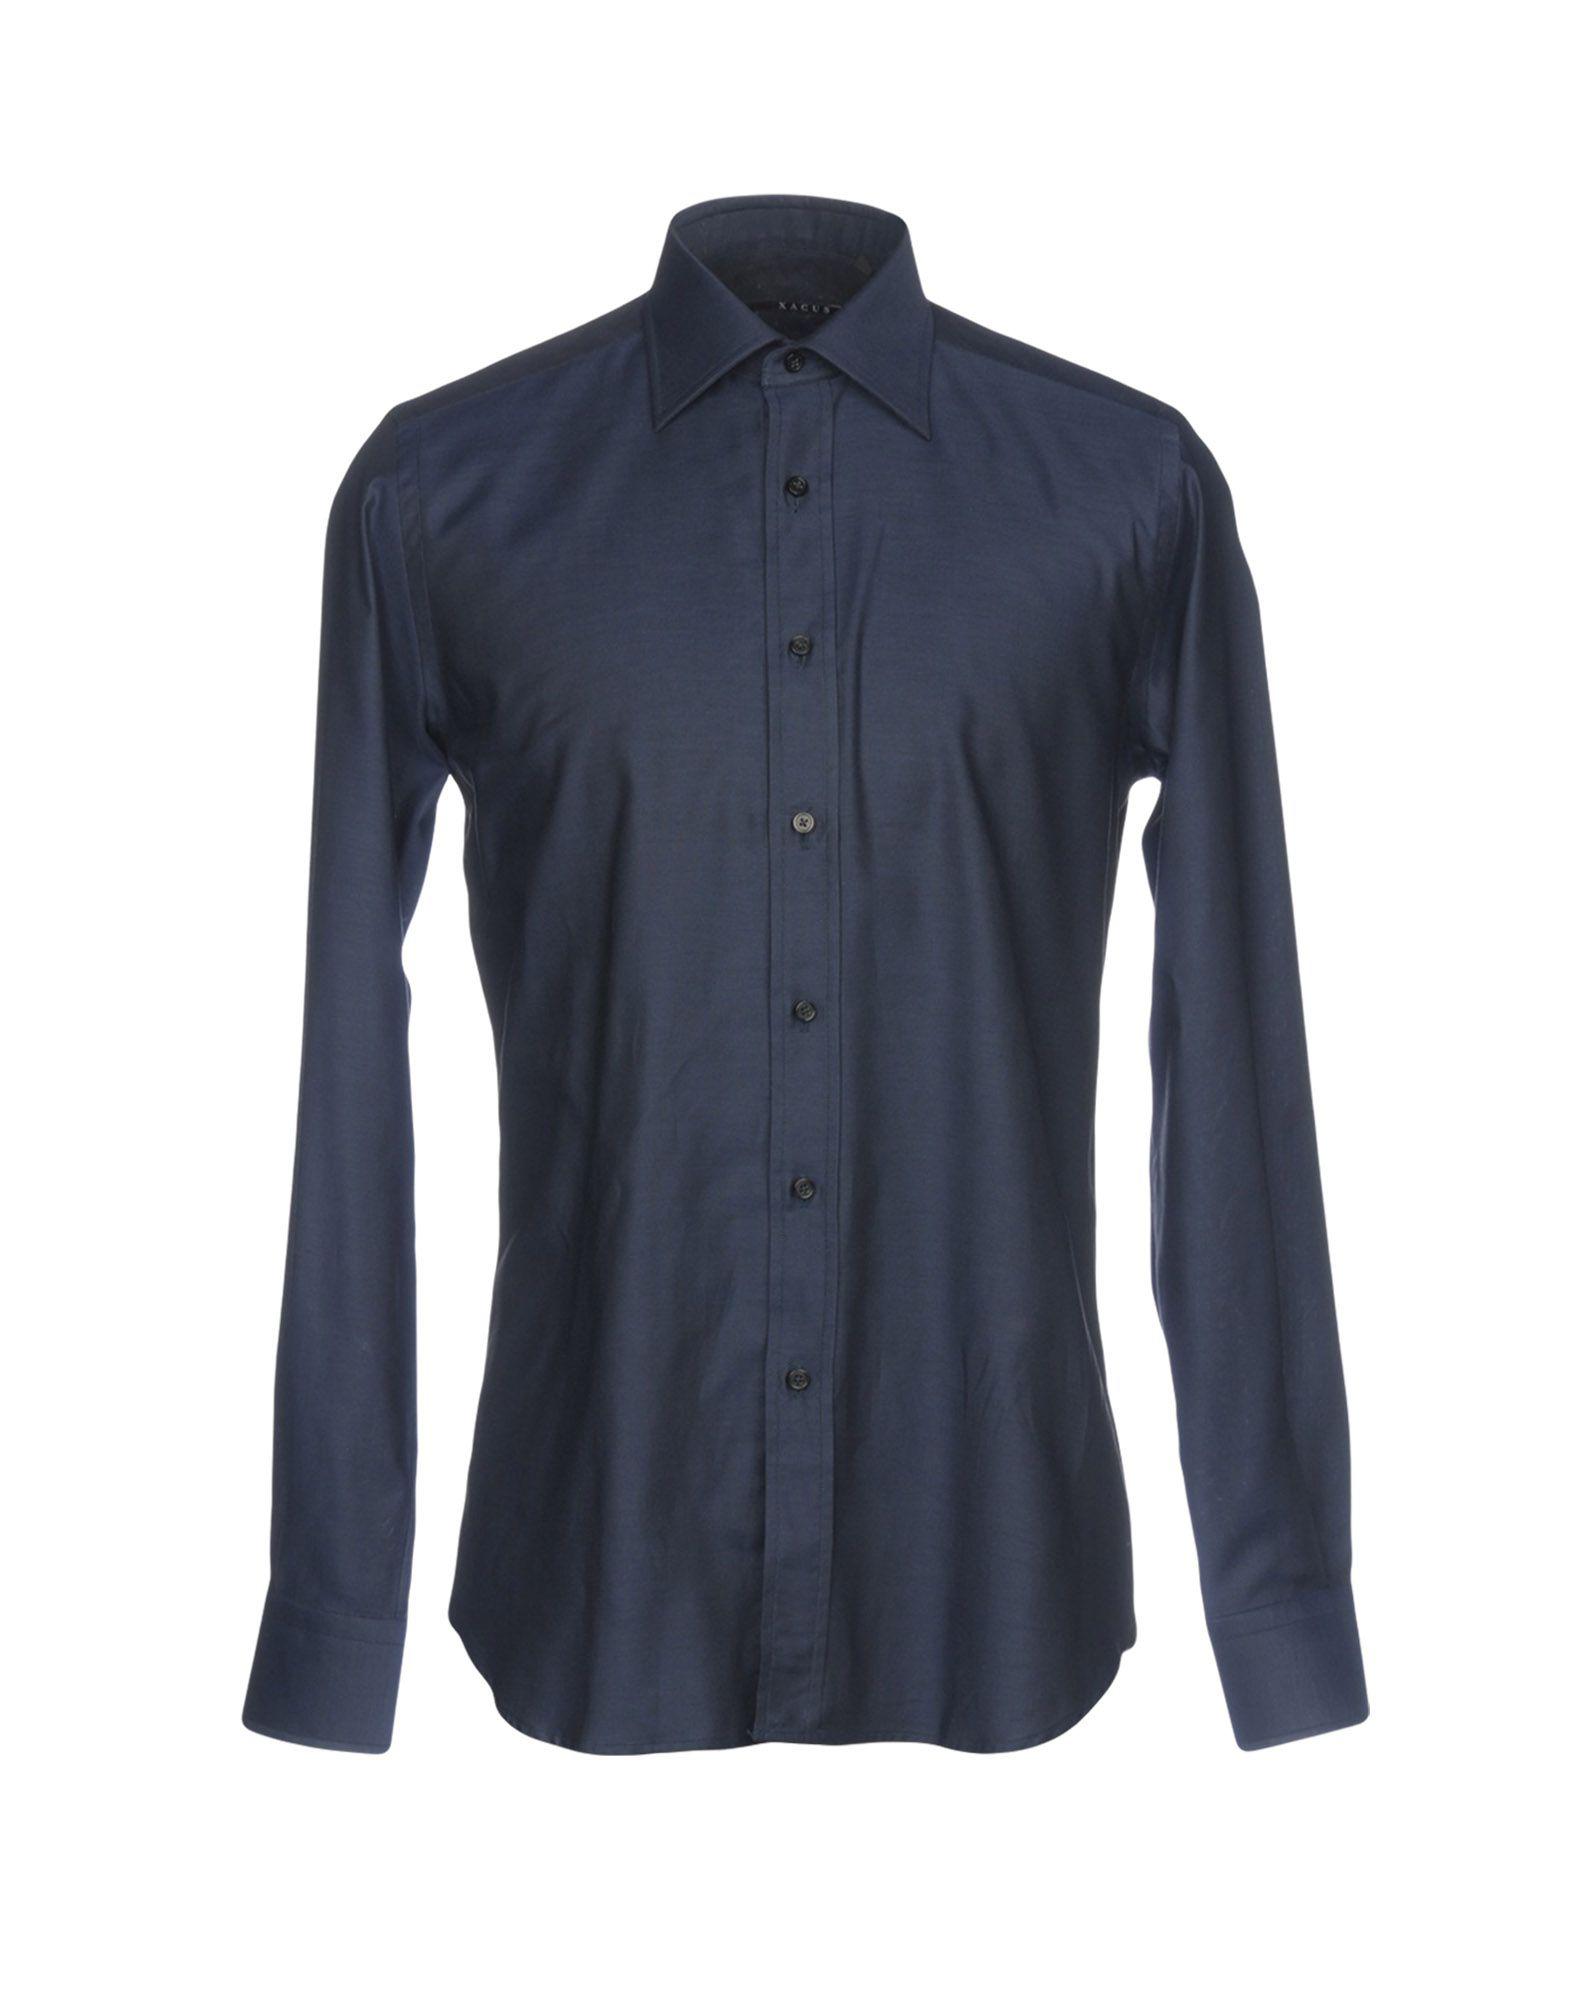 Xacus Cotton Shirt in Slate Blue (Blue) for Men - Lyst